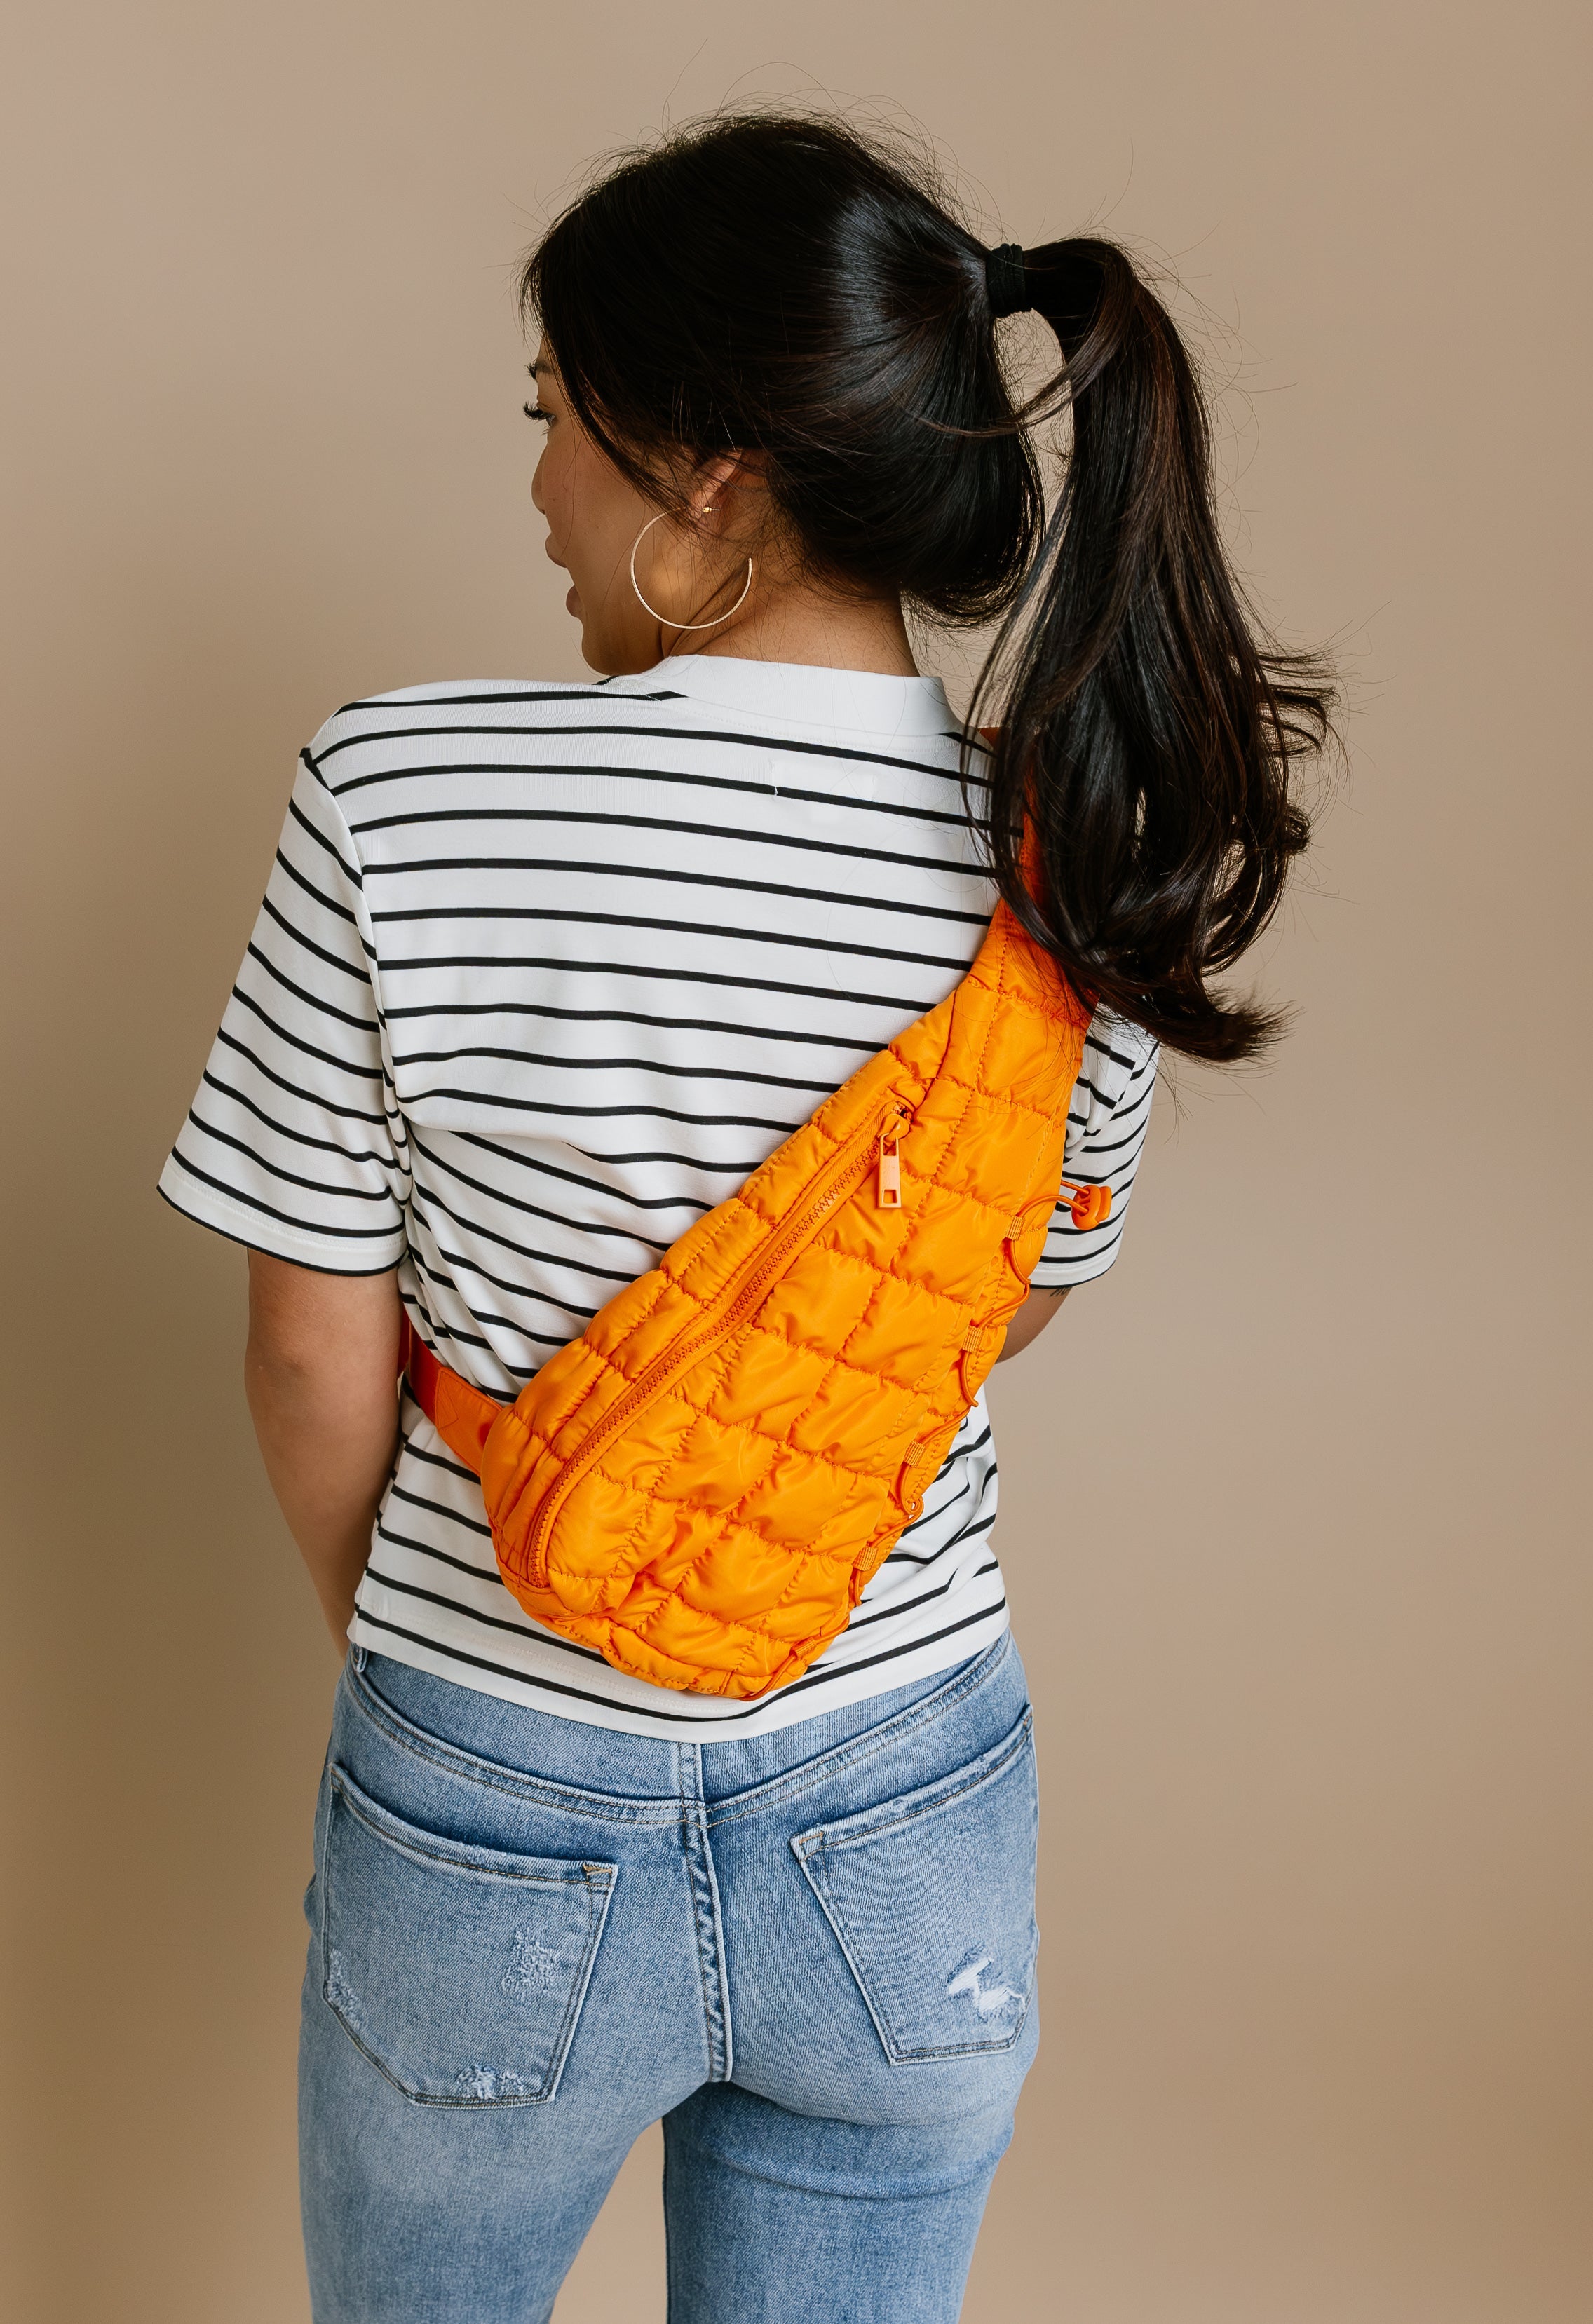 Discovery Sling Bag - ORANGE - willows clothing Backpack